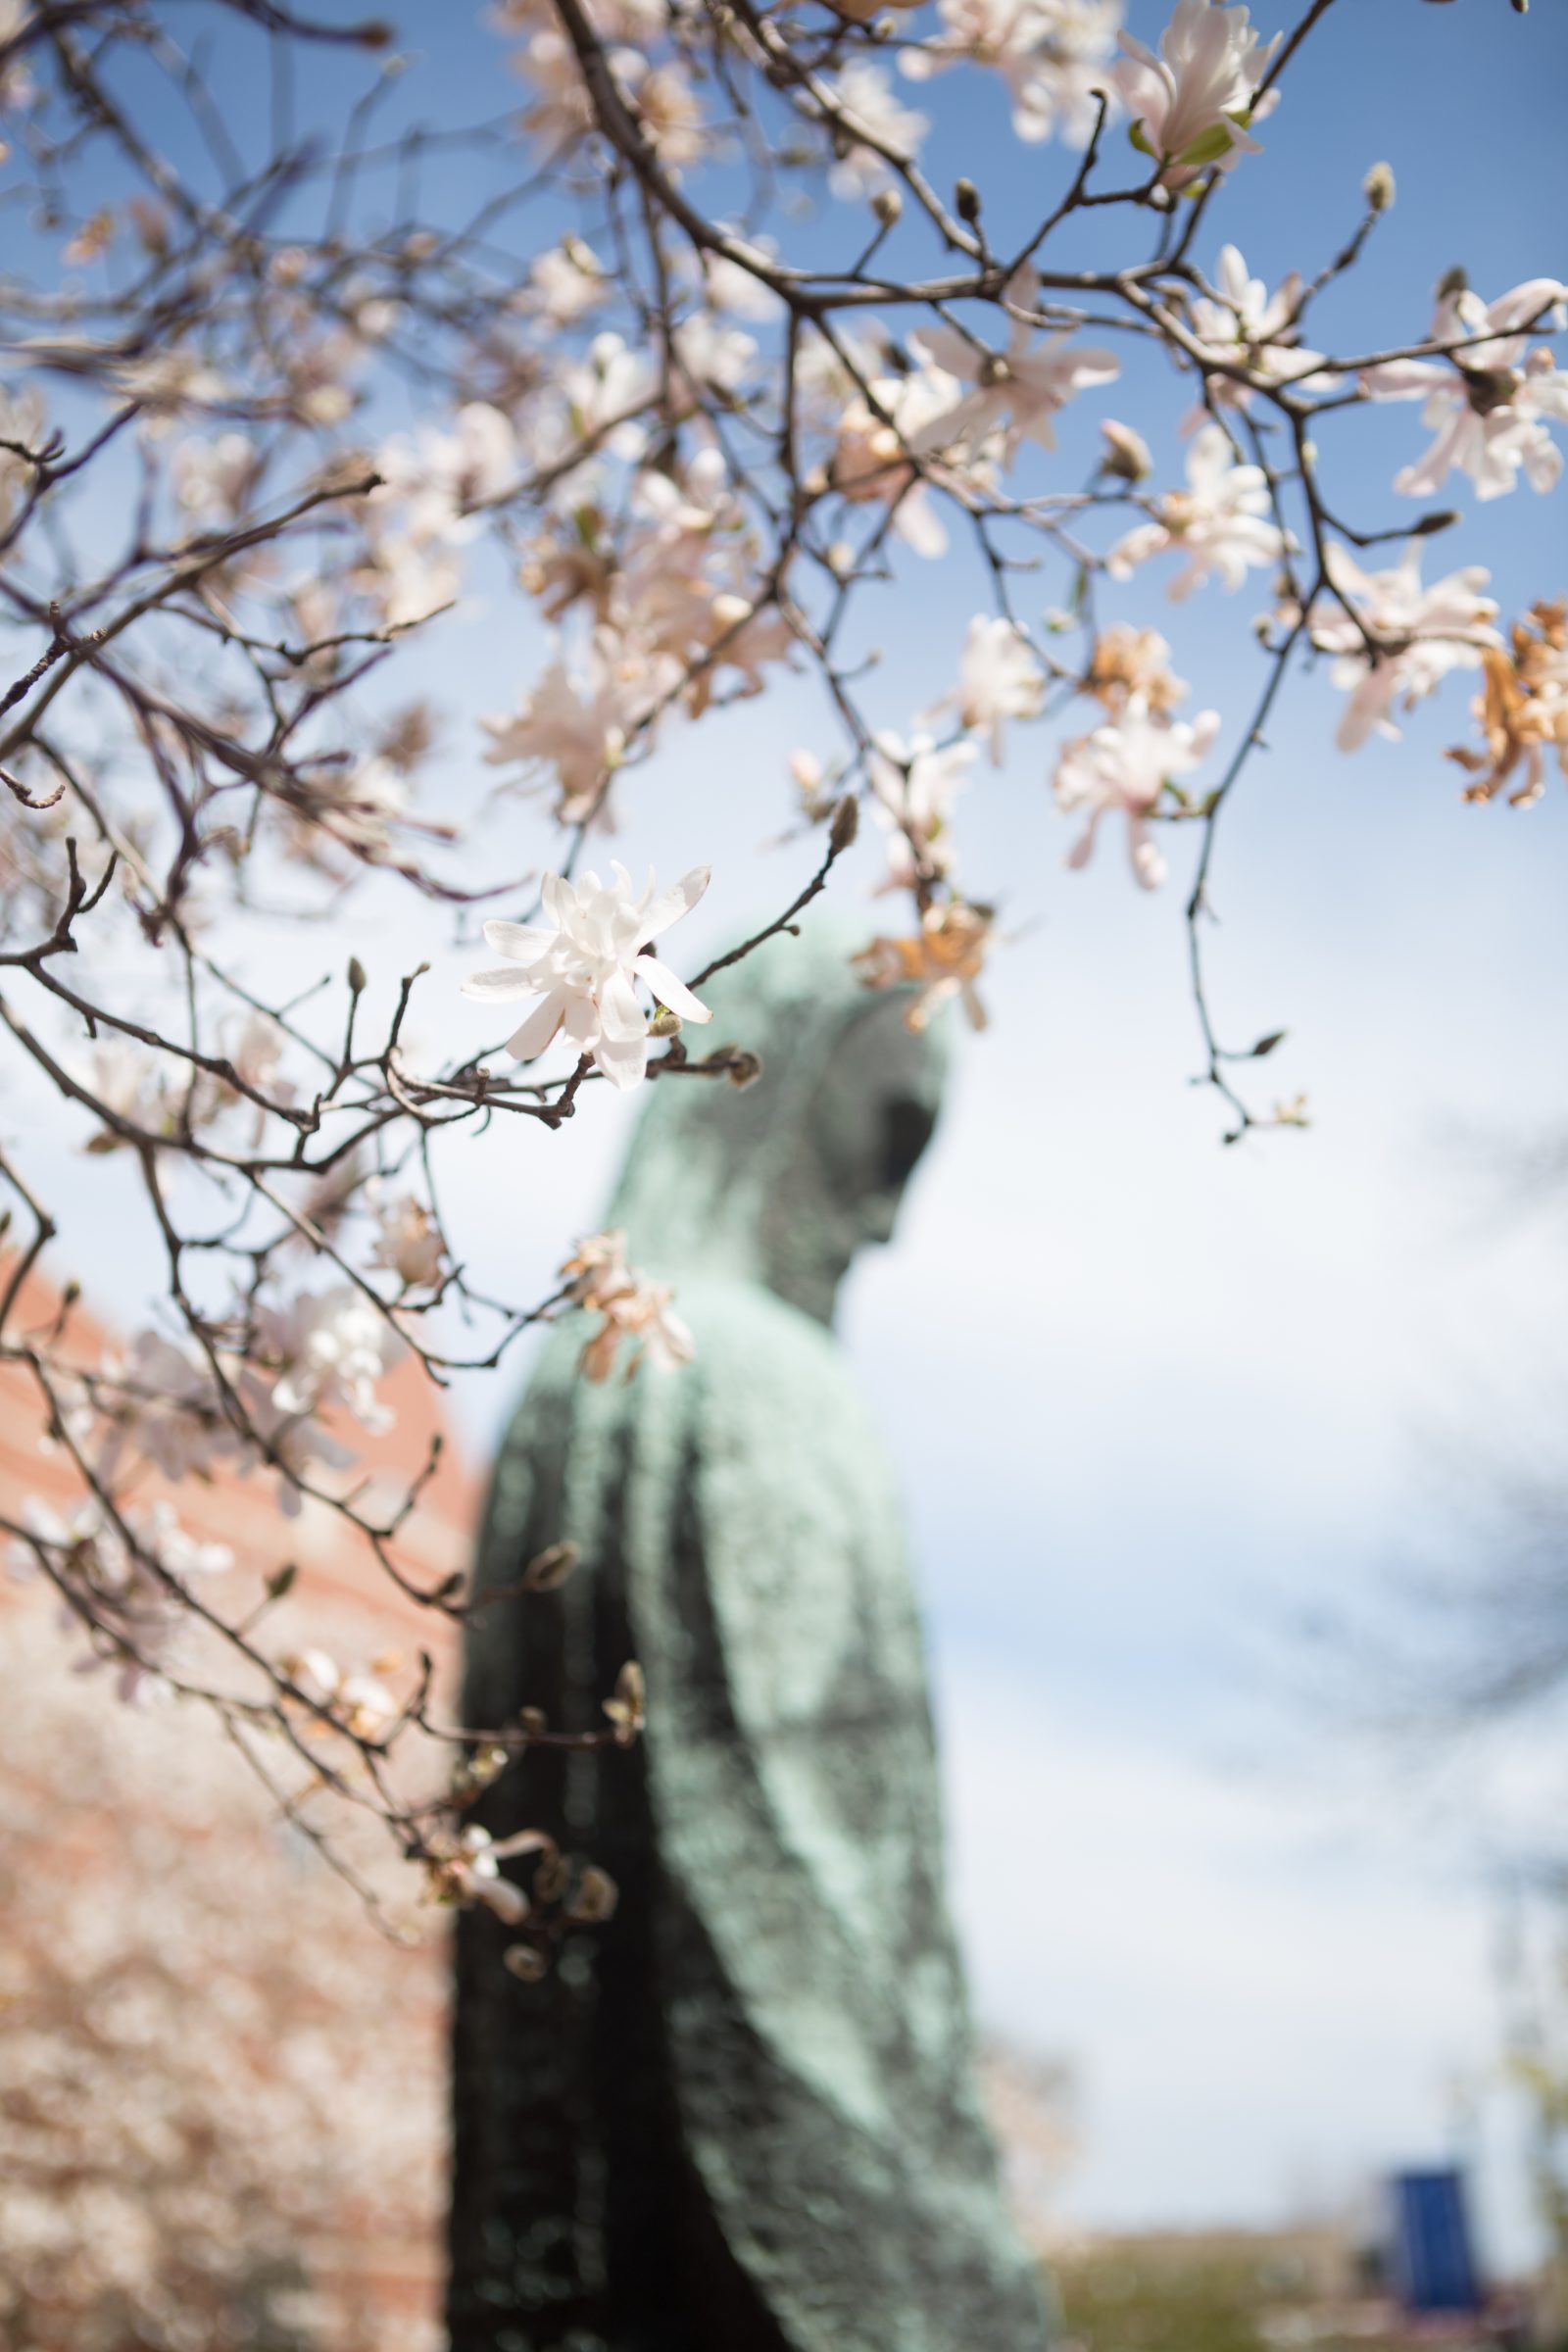 Statue of Jesus is seen through pink tree blossoms.